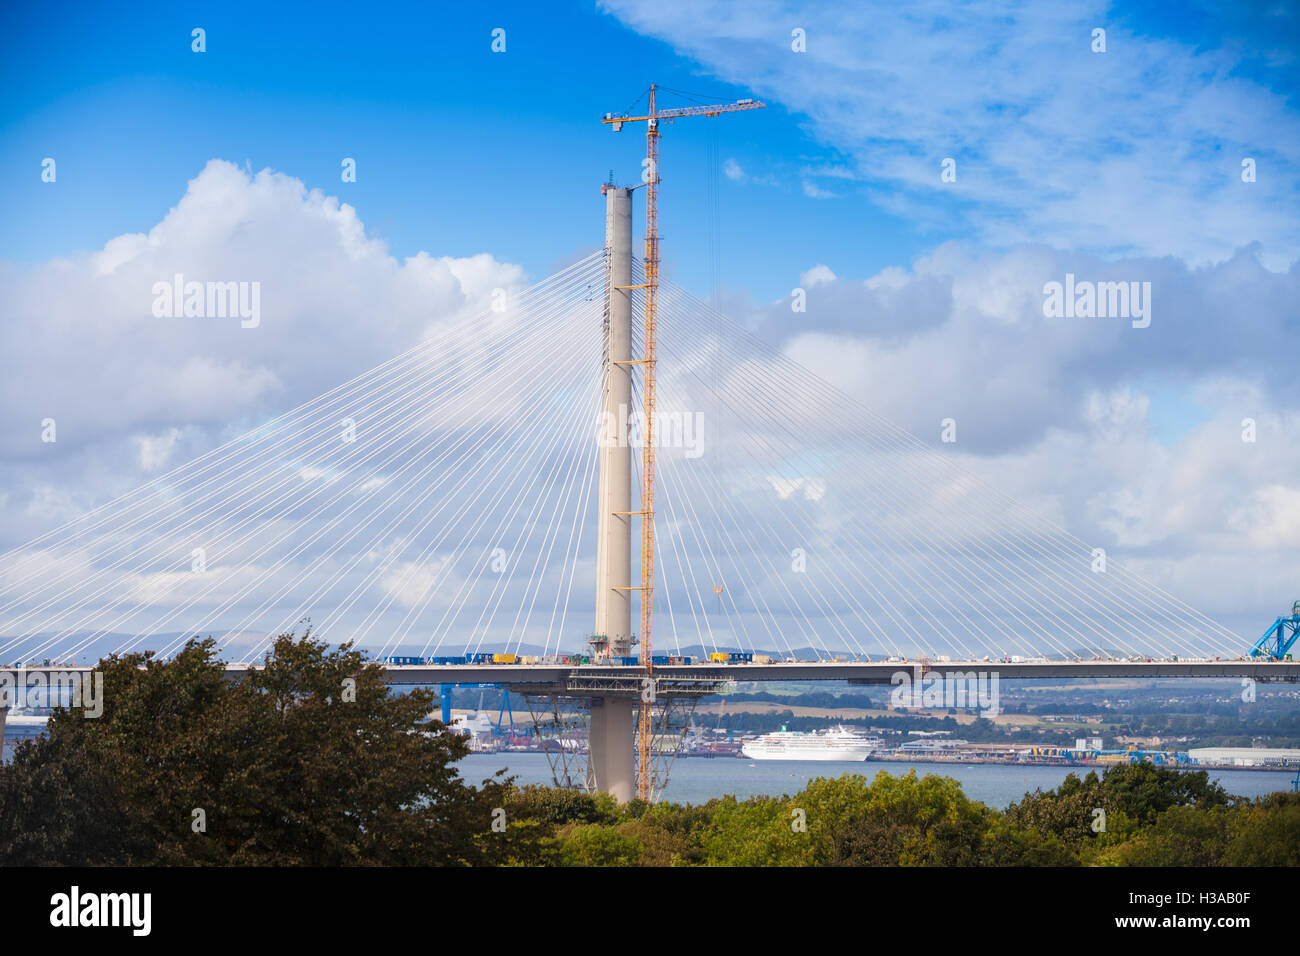 Central Tower of the New Queensferry Crossing over the Firth of Forth, Edinburgh Scotland. Stock Photo